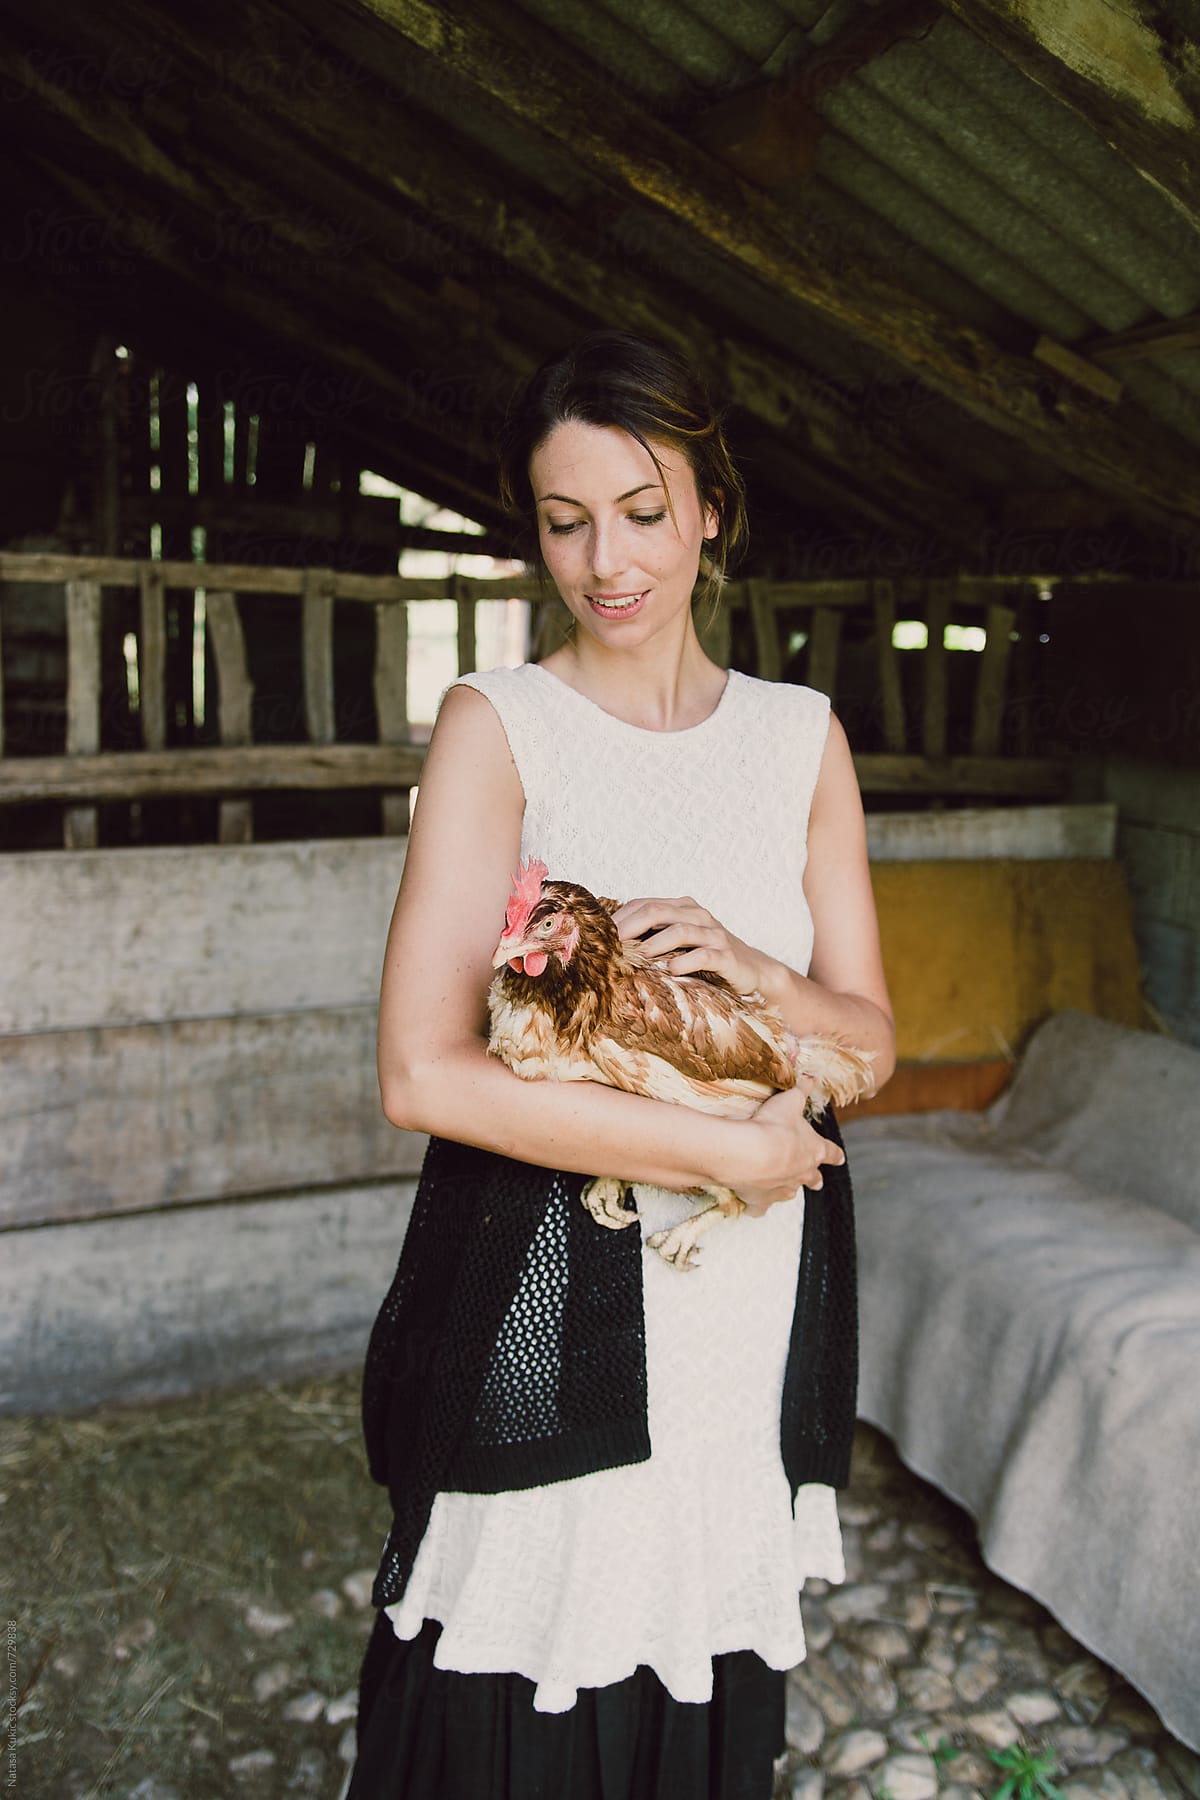 Portraits of a woman in the countryside holding chicken